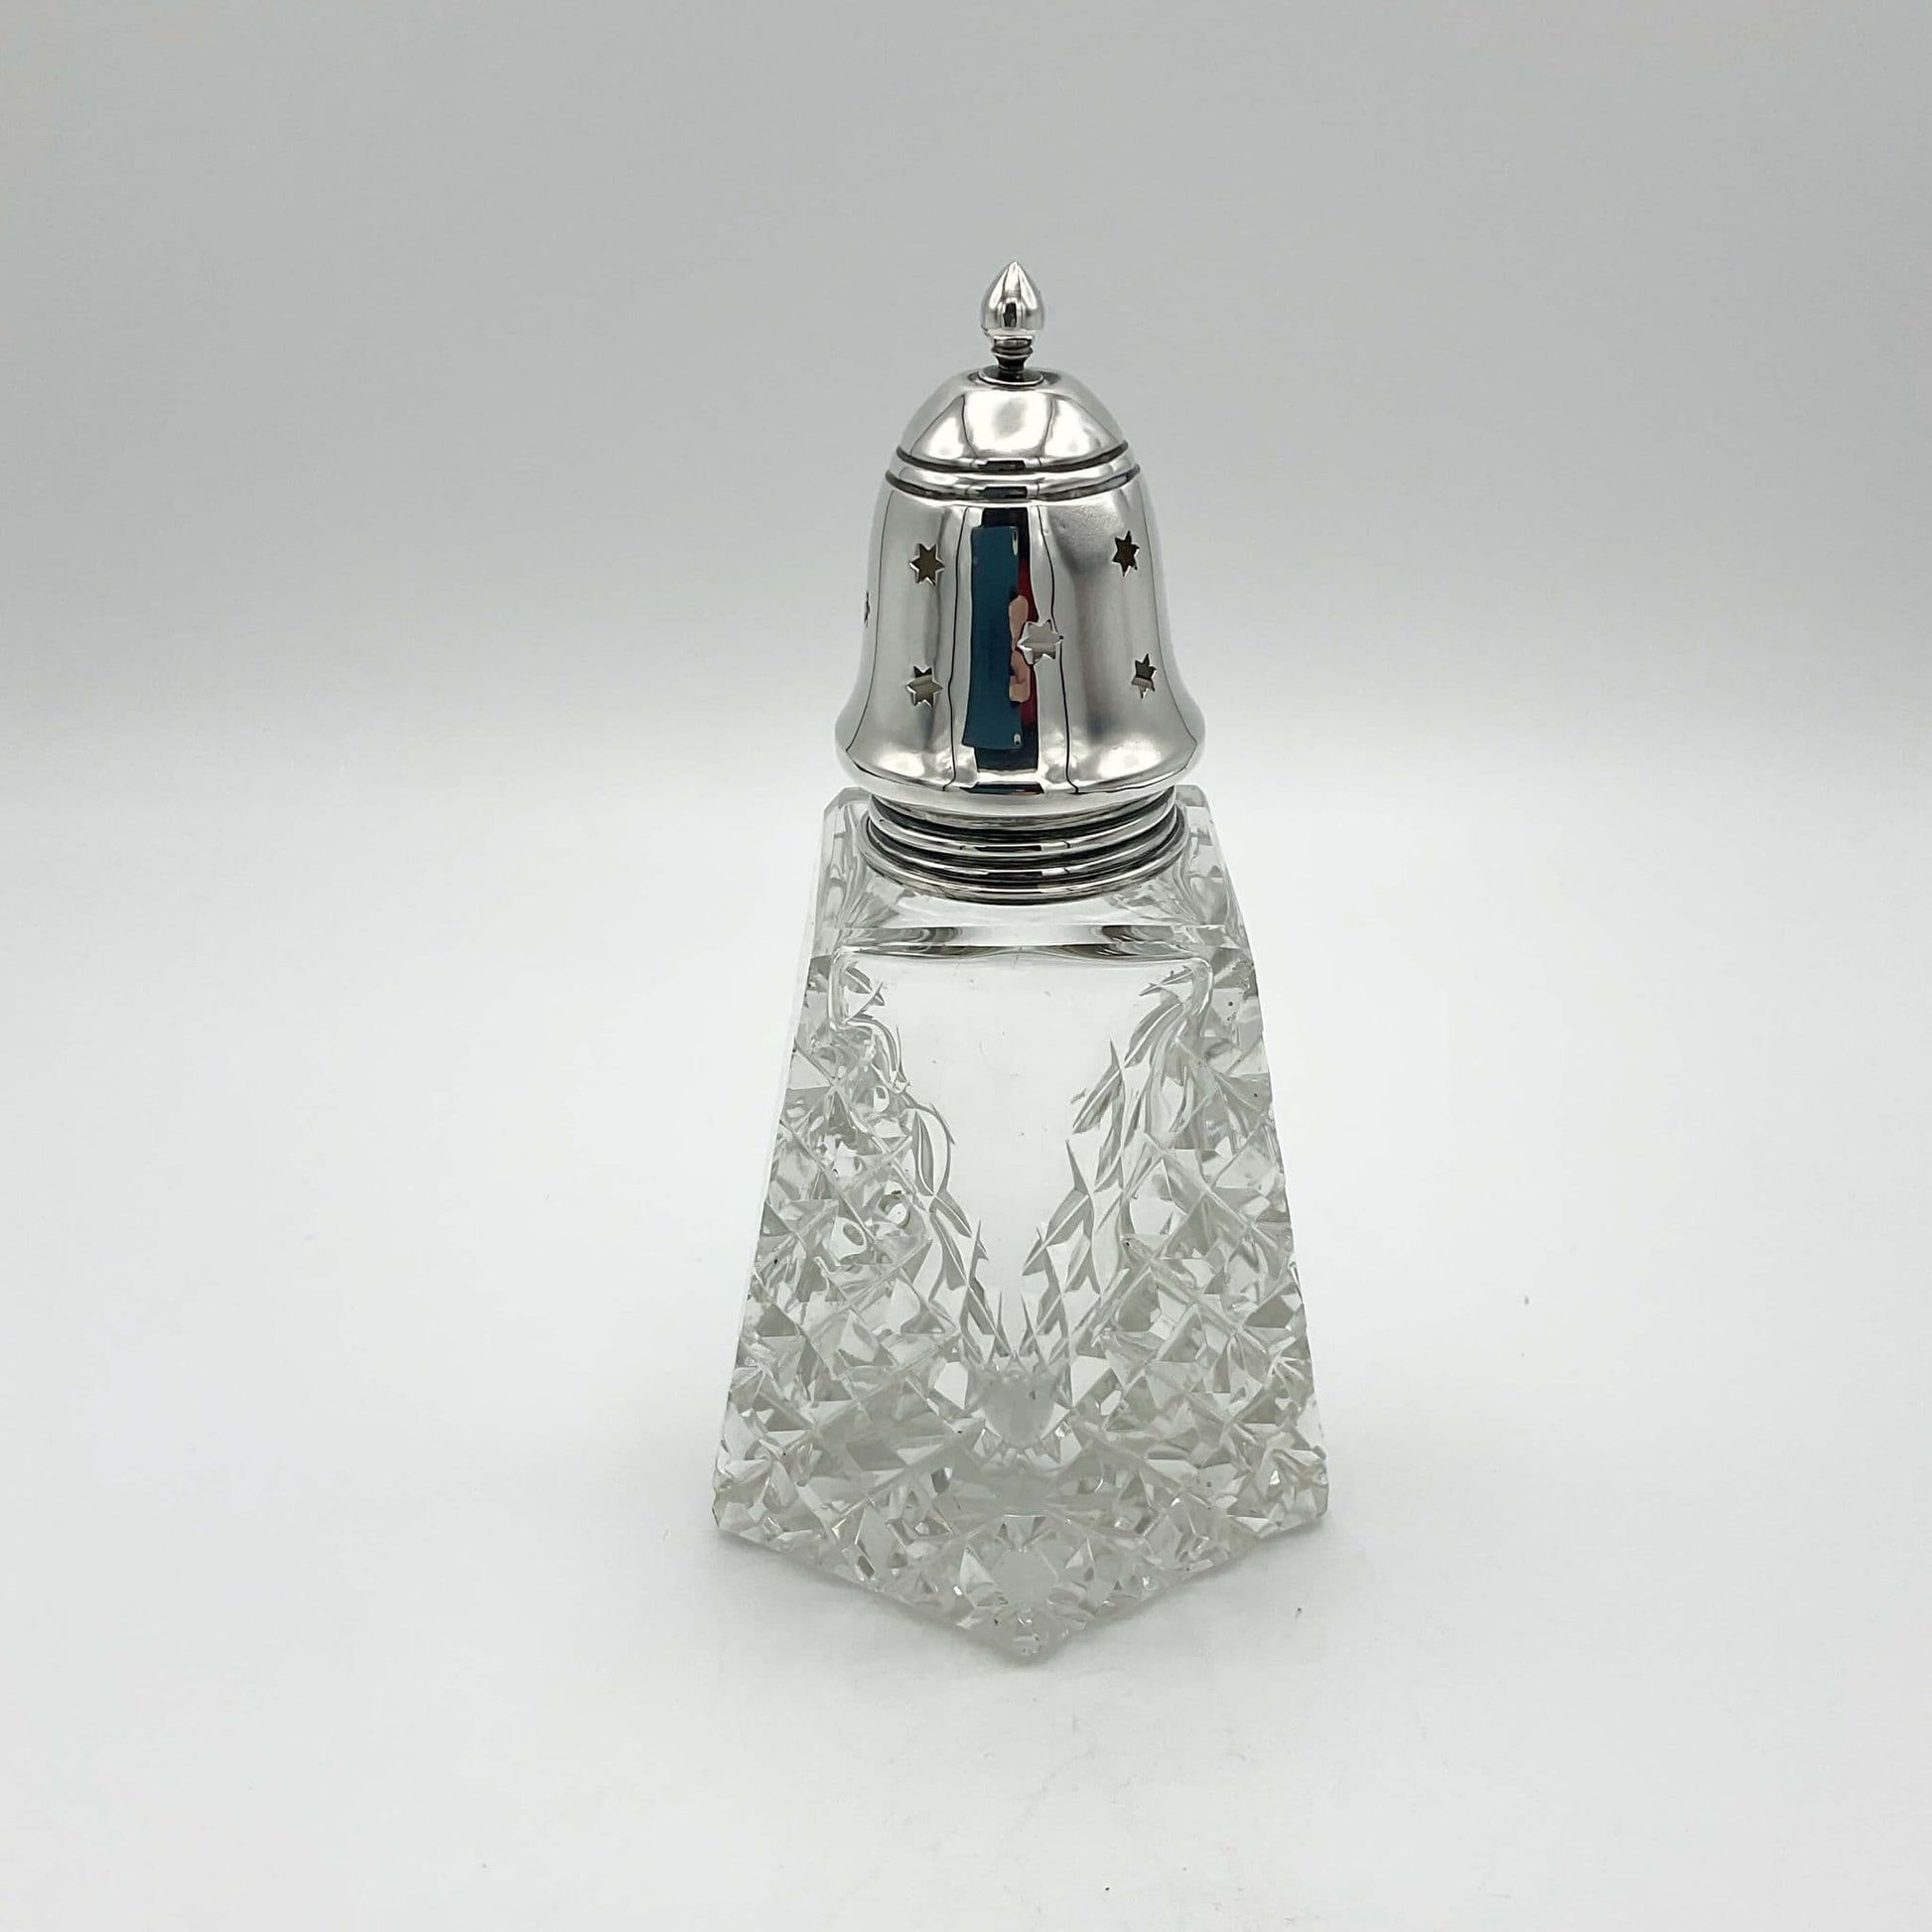 Crystal glass and silver topped sugar shaker on a white background